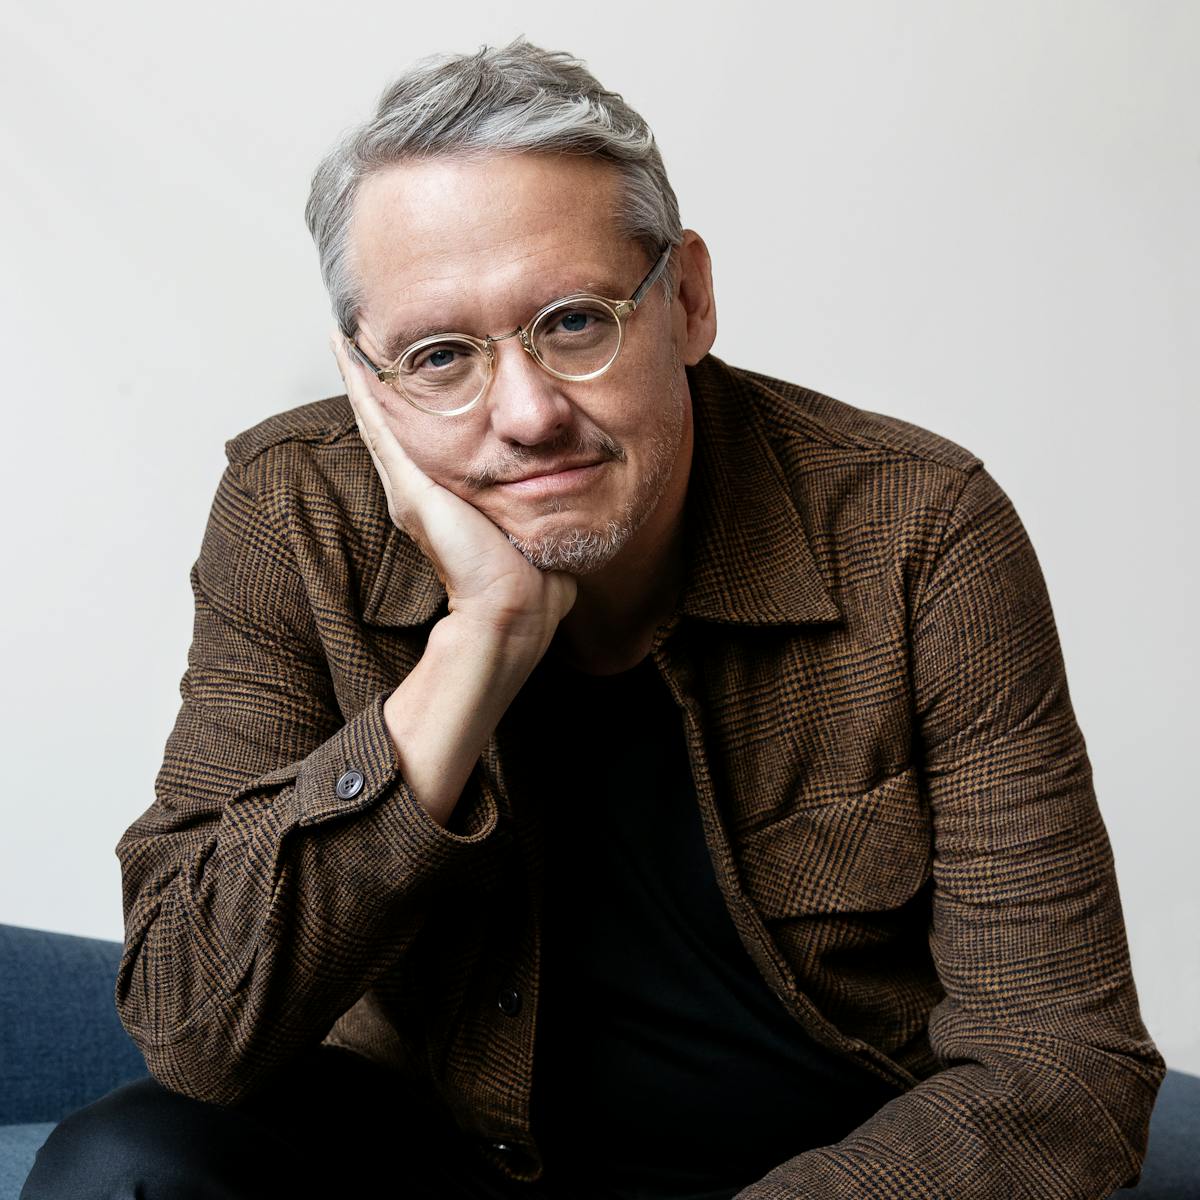 Adam McKay wears jeans and a brown jacket with his chin resting on his palm.